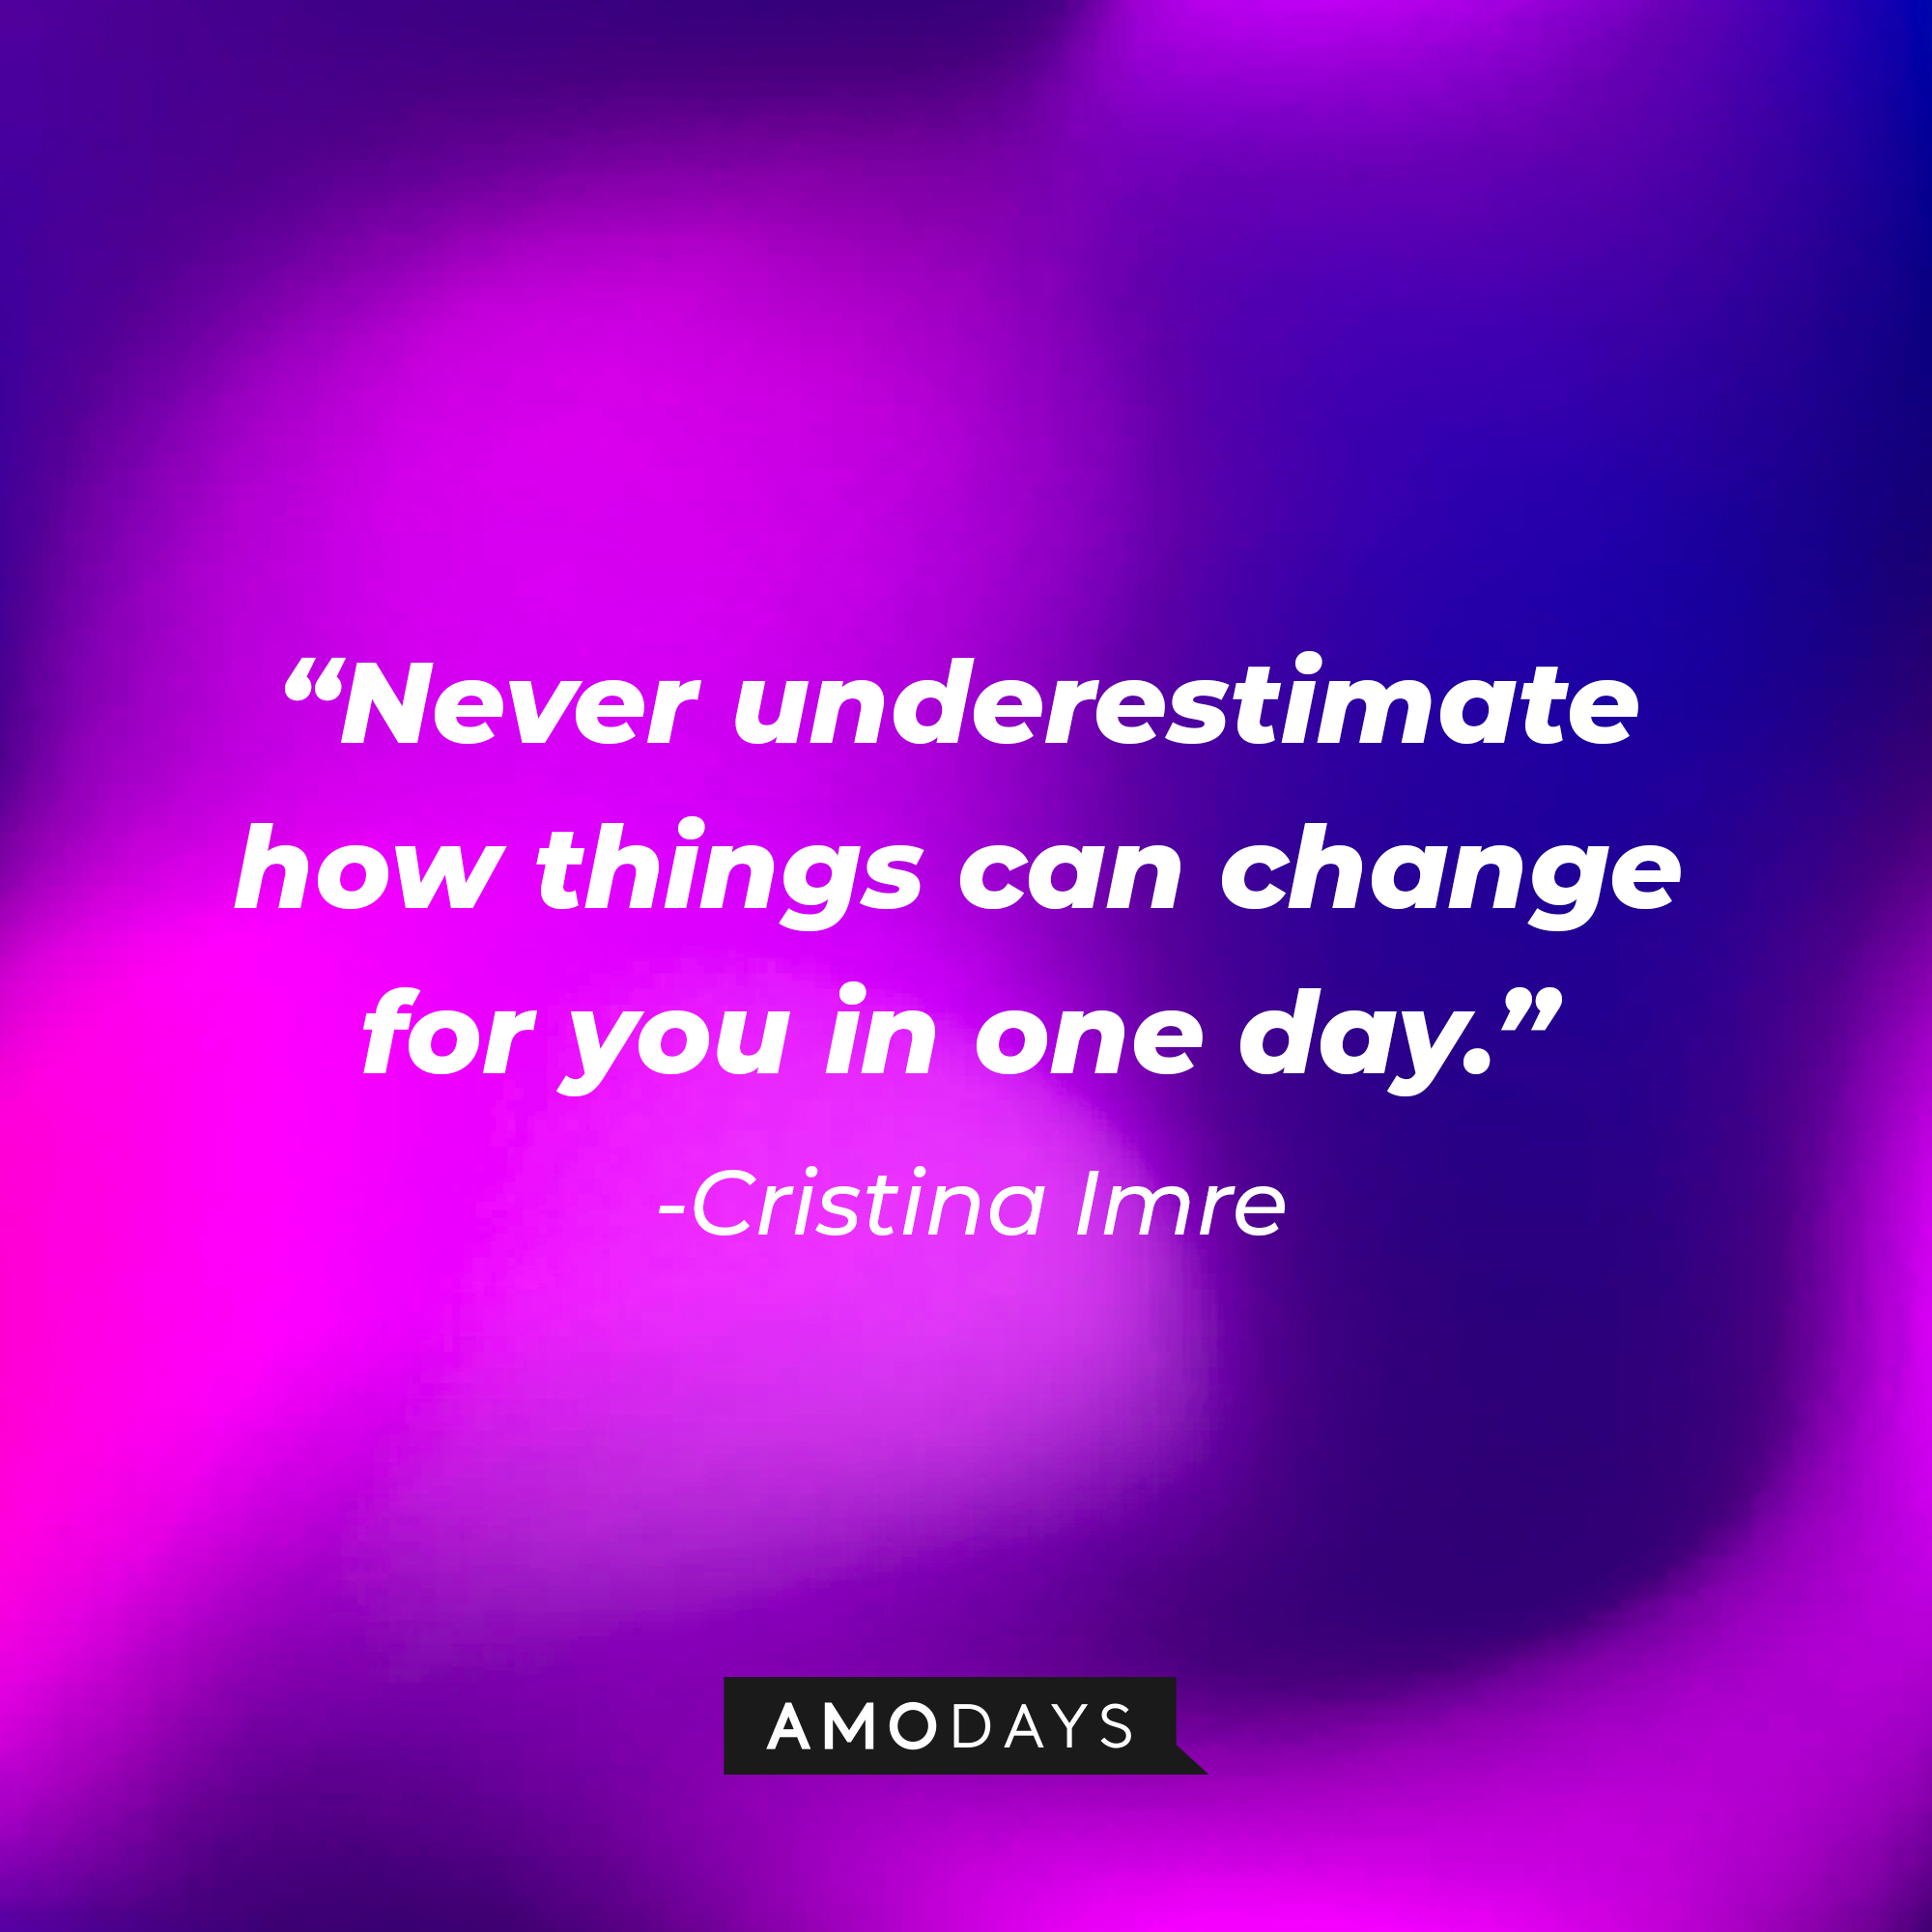 Cristina Imre's quote: "Never underestimate how things can change for you in one day."  | Image: Amodays